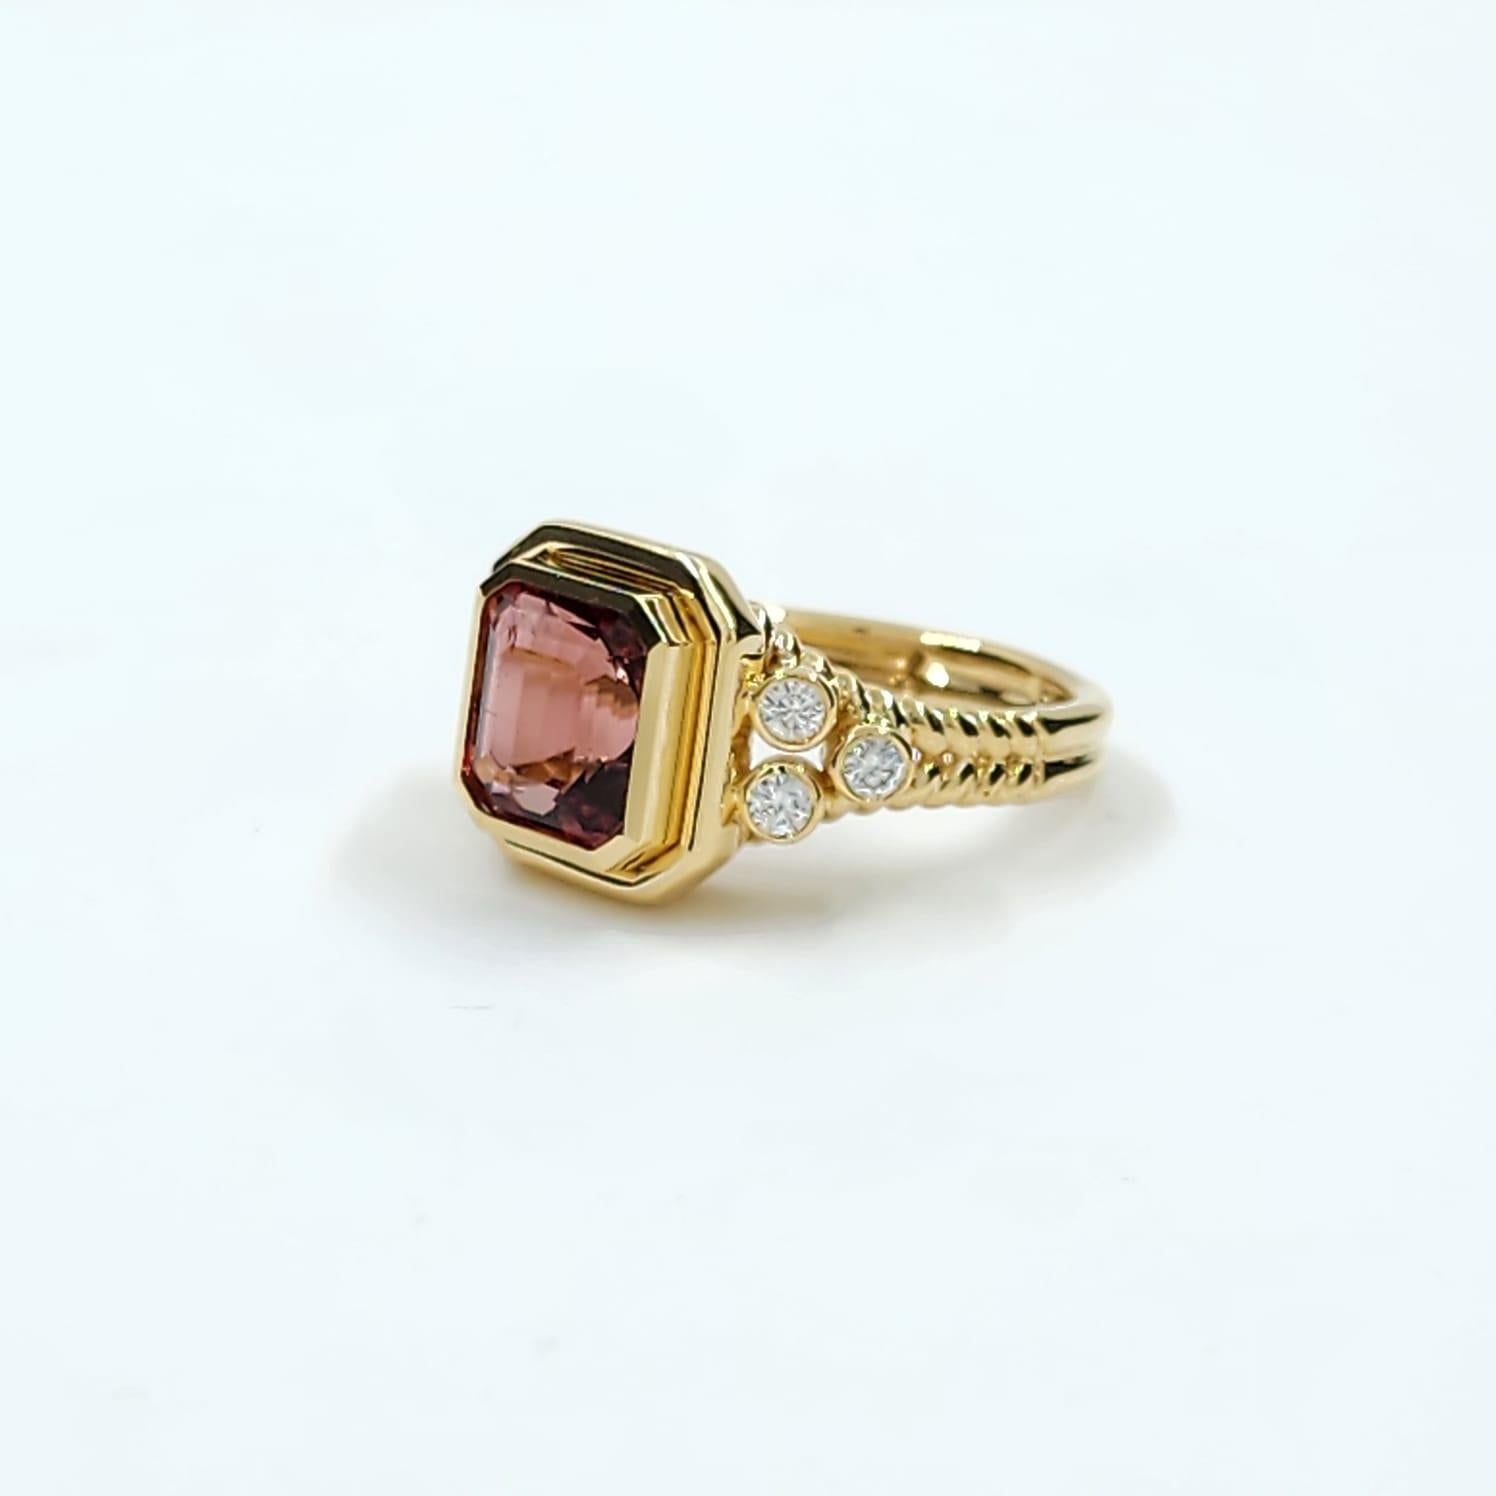 3.41 Carat Pink Tourmaline Cocktail Ring in 18K Yellow Gold For Sale 1